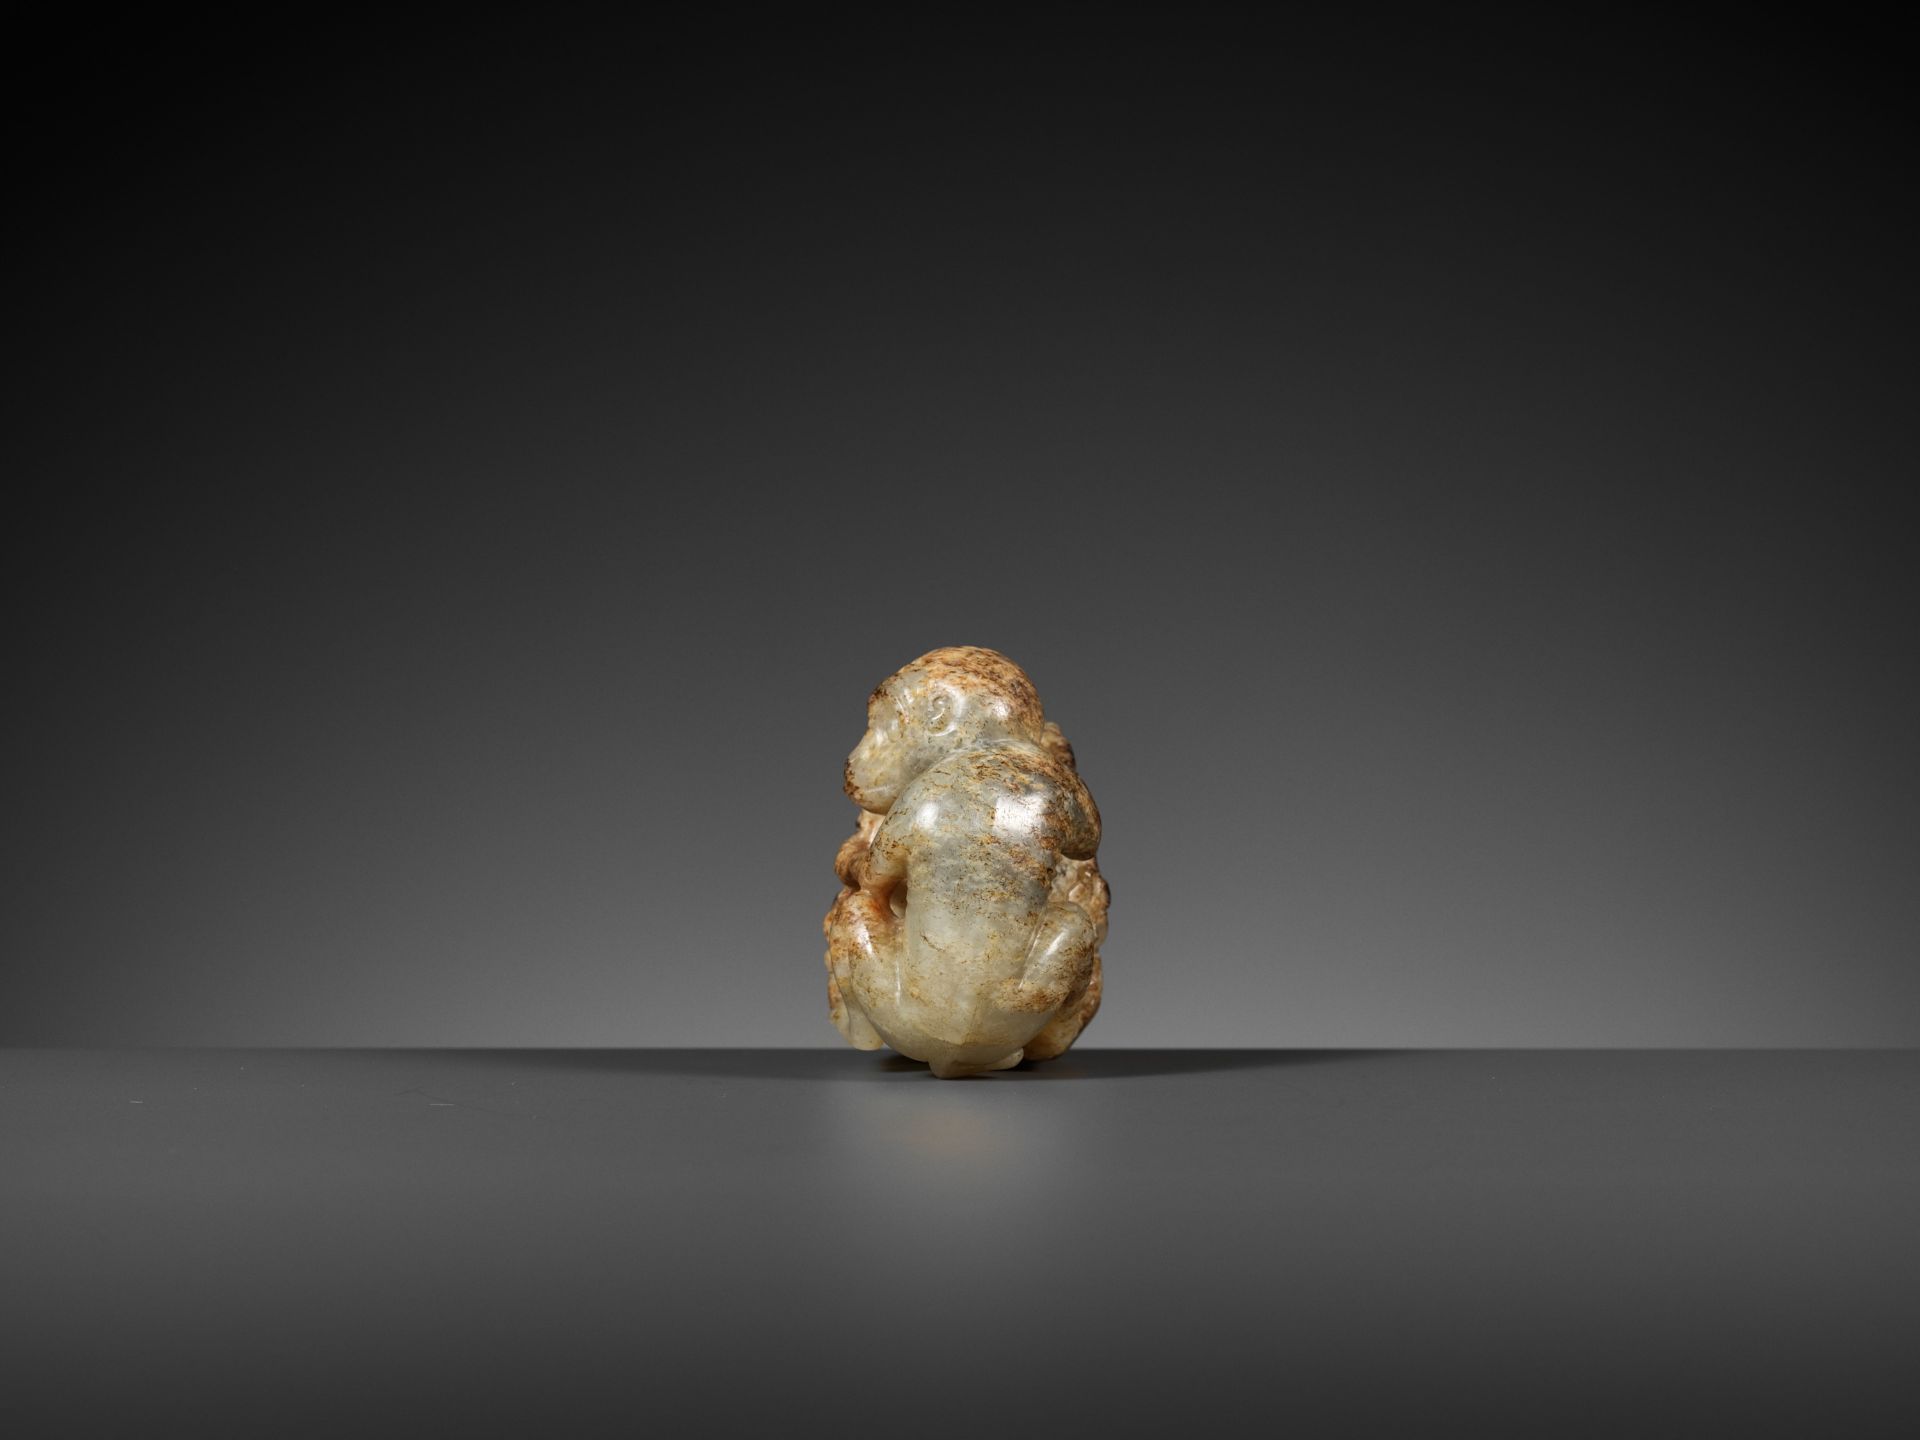 A MOTTLED PALE CELADON JADE 'MONKEY AND PEACH' FIGURE, 17TH - 18TH CENTURY - Image 6 of 10